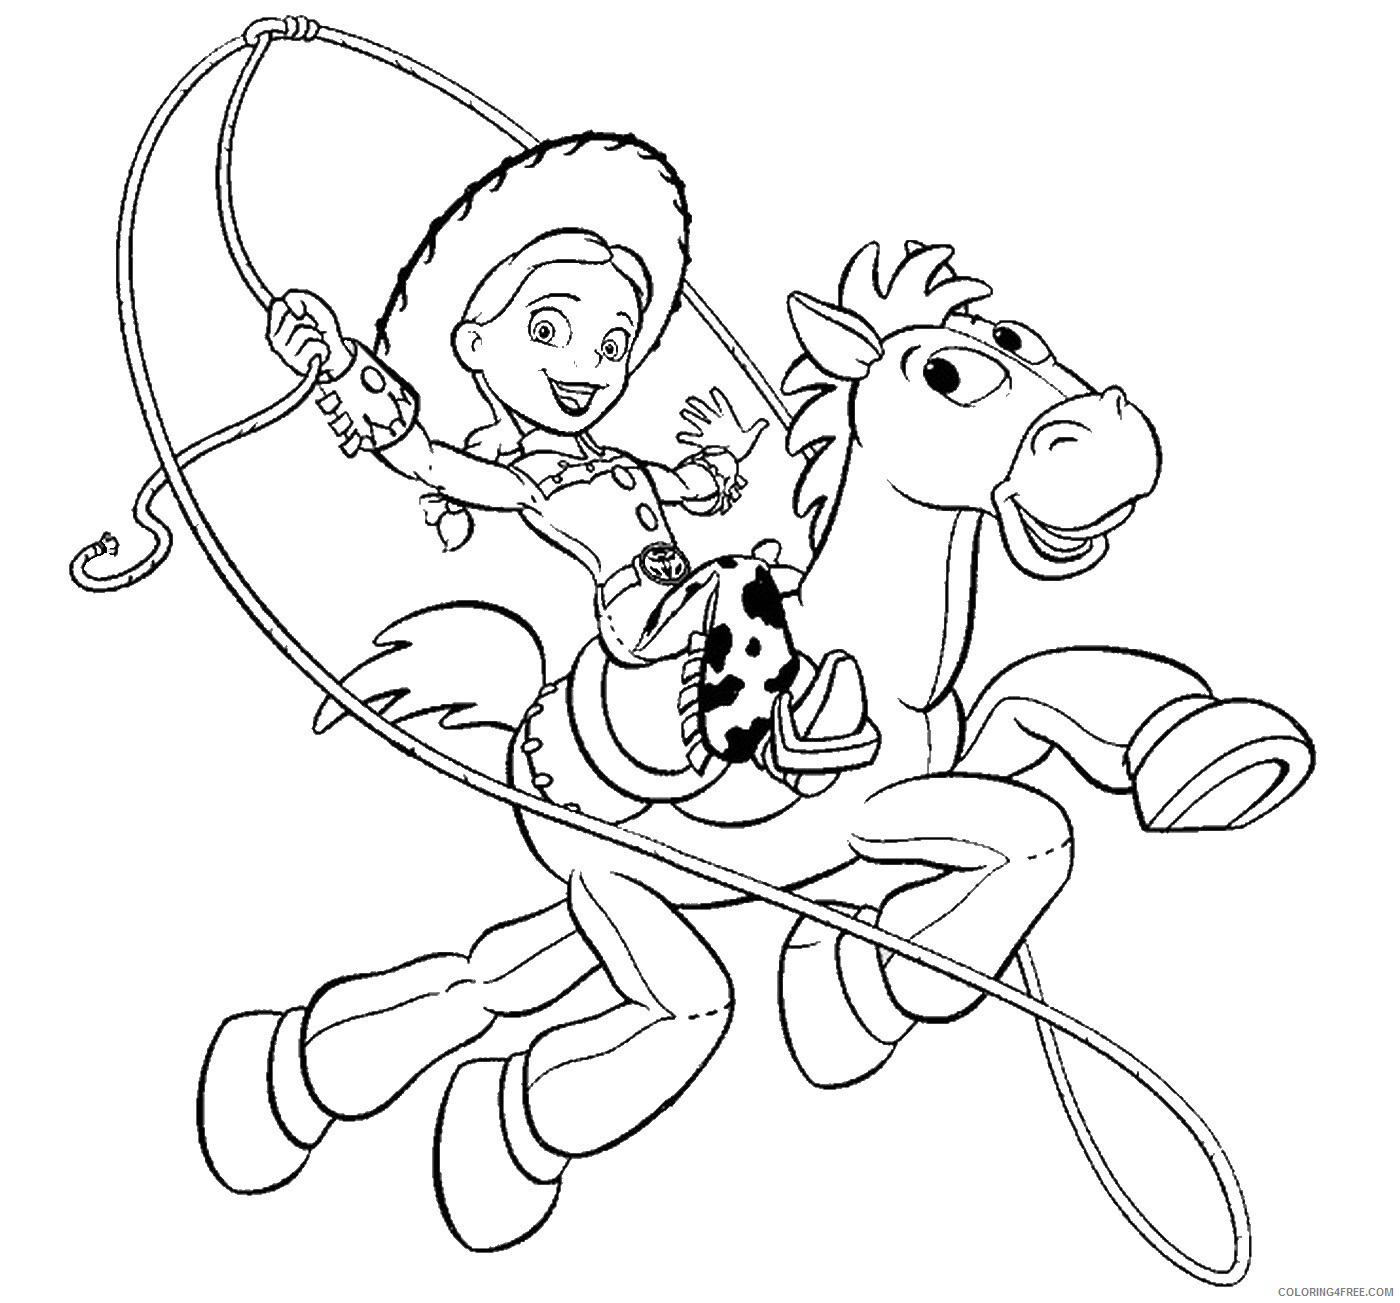 Toy Story Coloring Pages TV Film toystory_72 Printable 2020 10387 Coloring4free